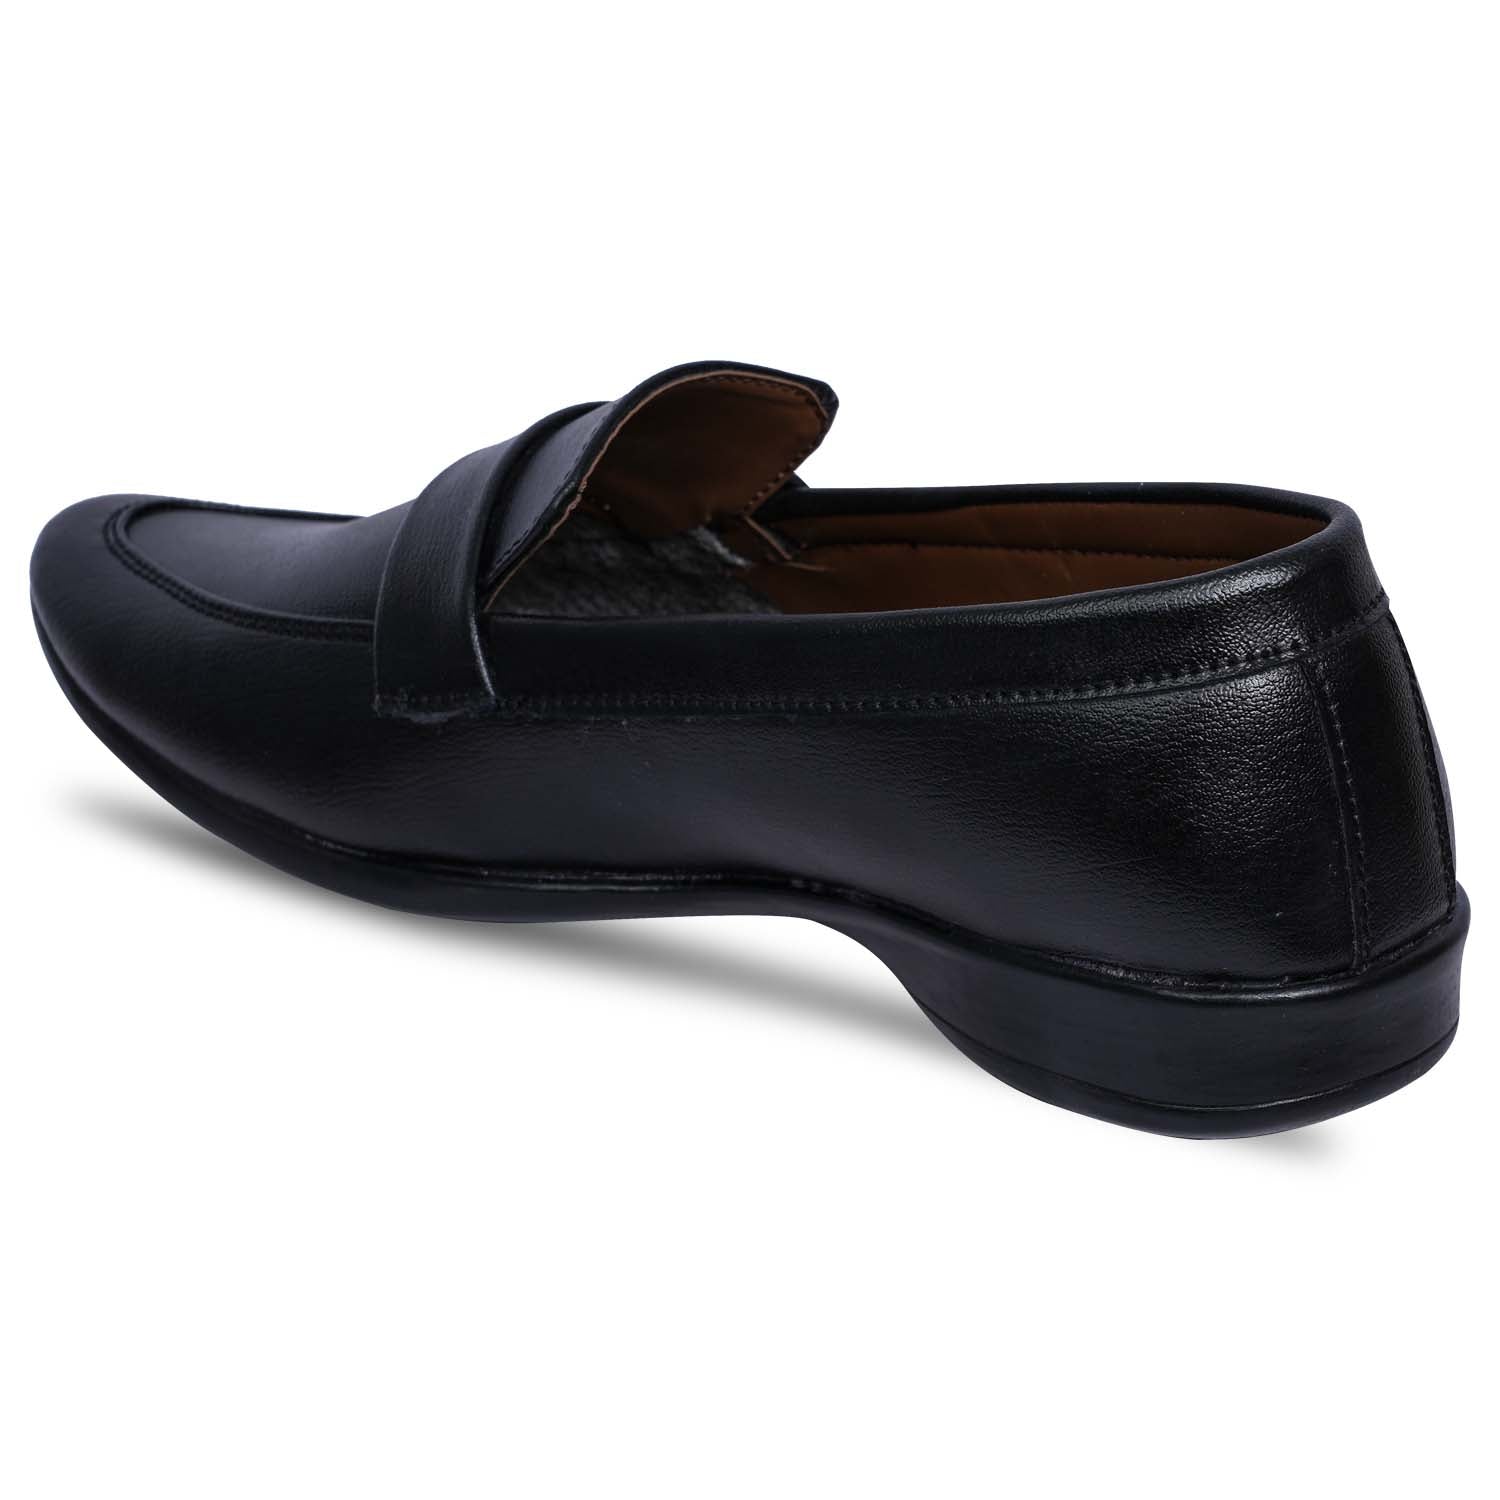 Paragon R2005G Men Formal Shoes | Corporate Office Shoes | Smart &amp; Sleek Design | Comfortable Sole with Cushioning | Daily &amp; Occasion Wear